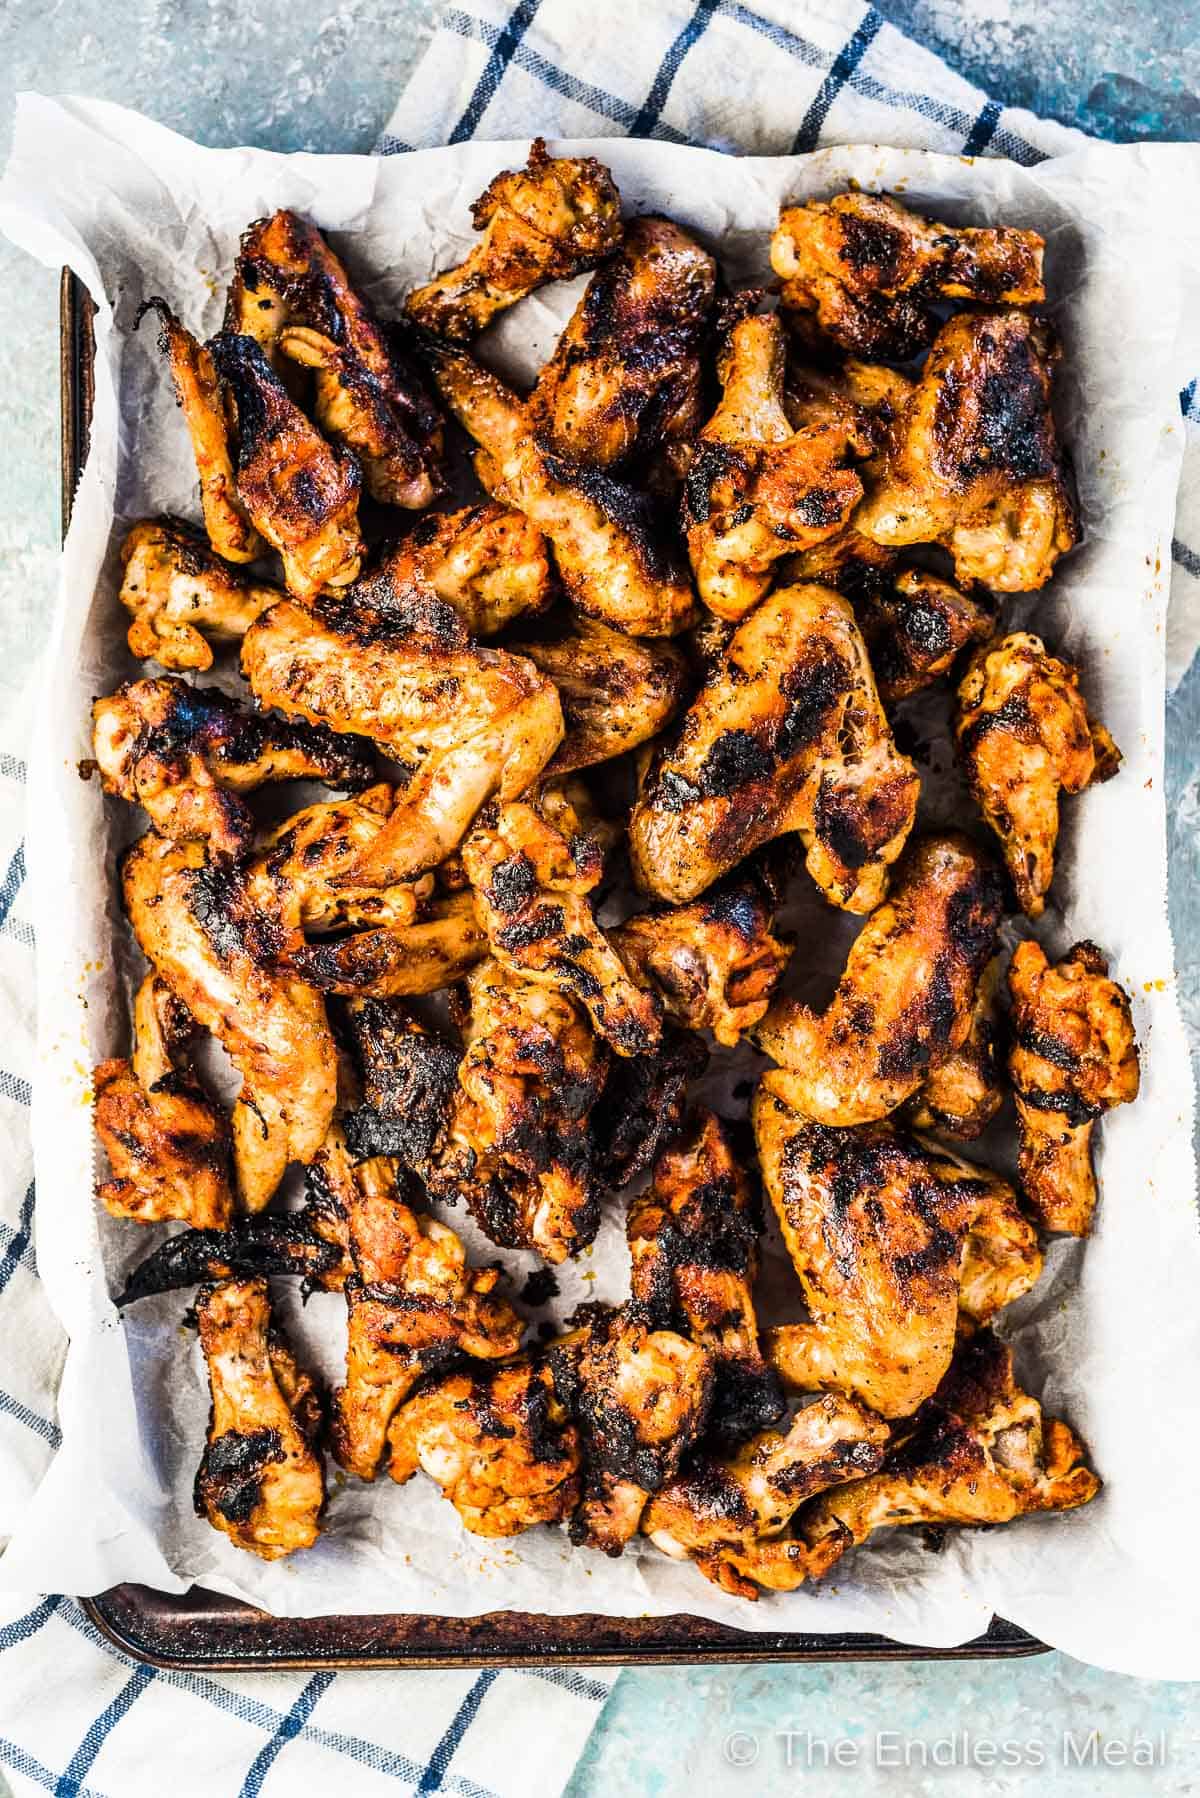 BBQ chicken wings hot off the grill.